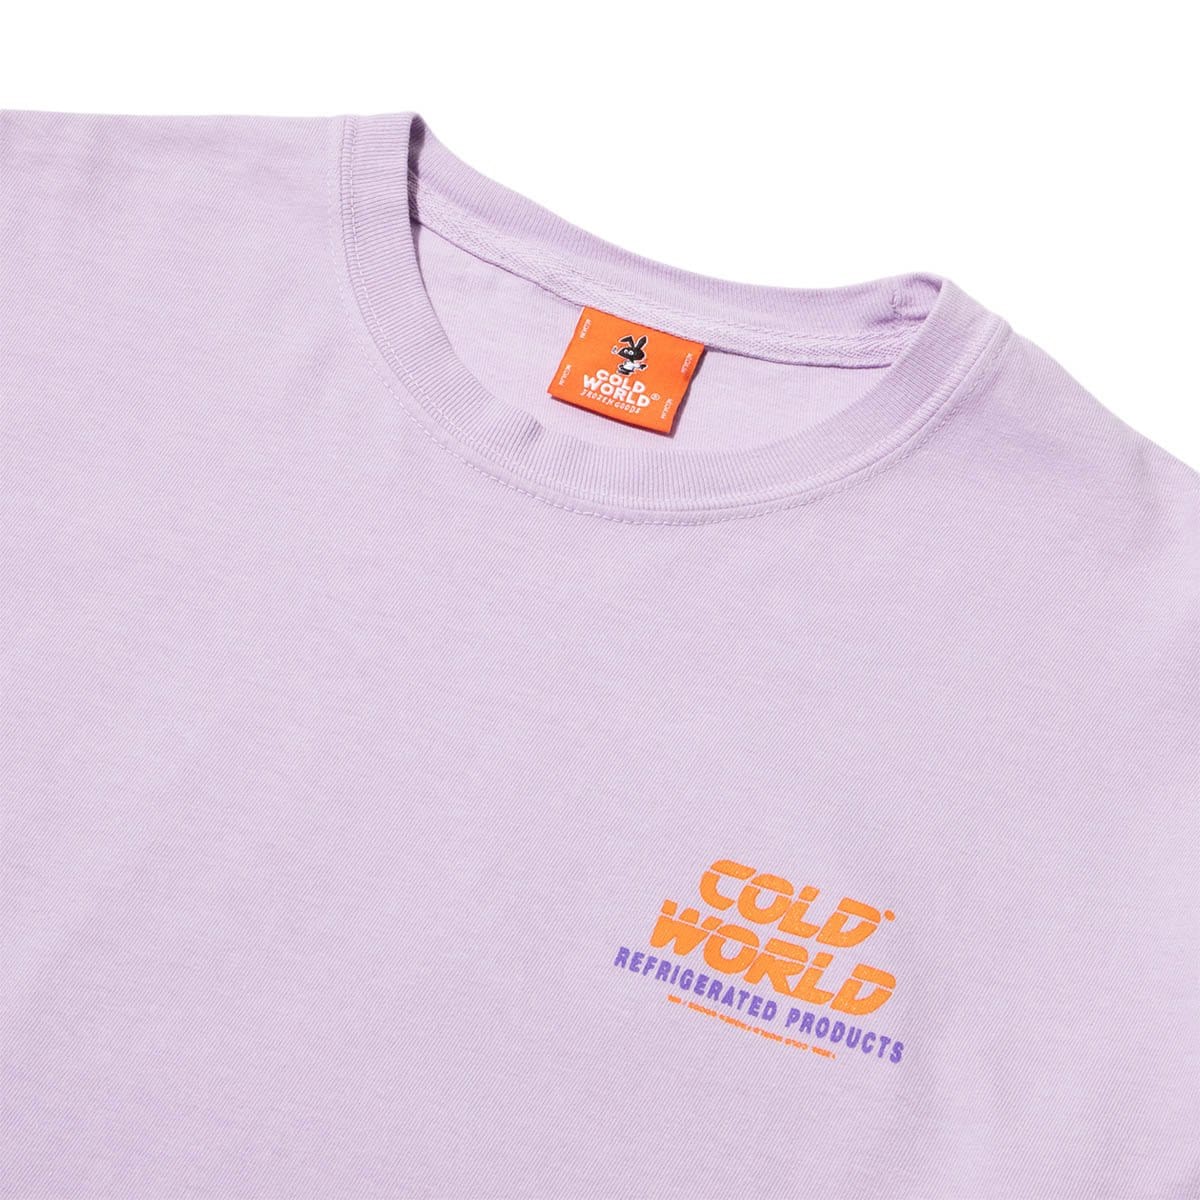 Cold World Frozen Goods T-Shirts MEAN BUNNY T-SHIRT